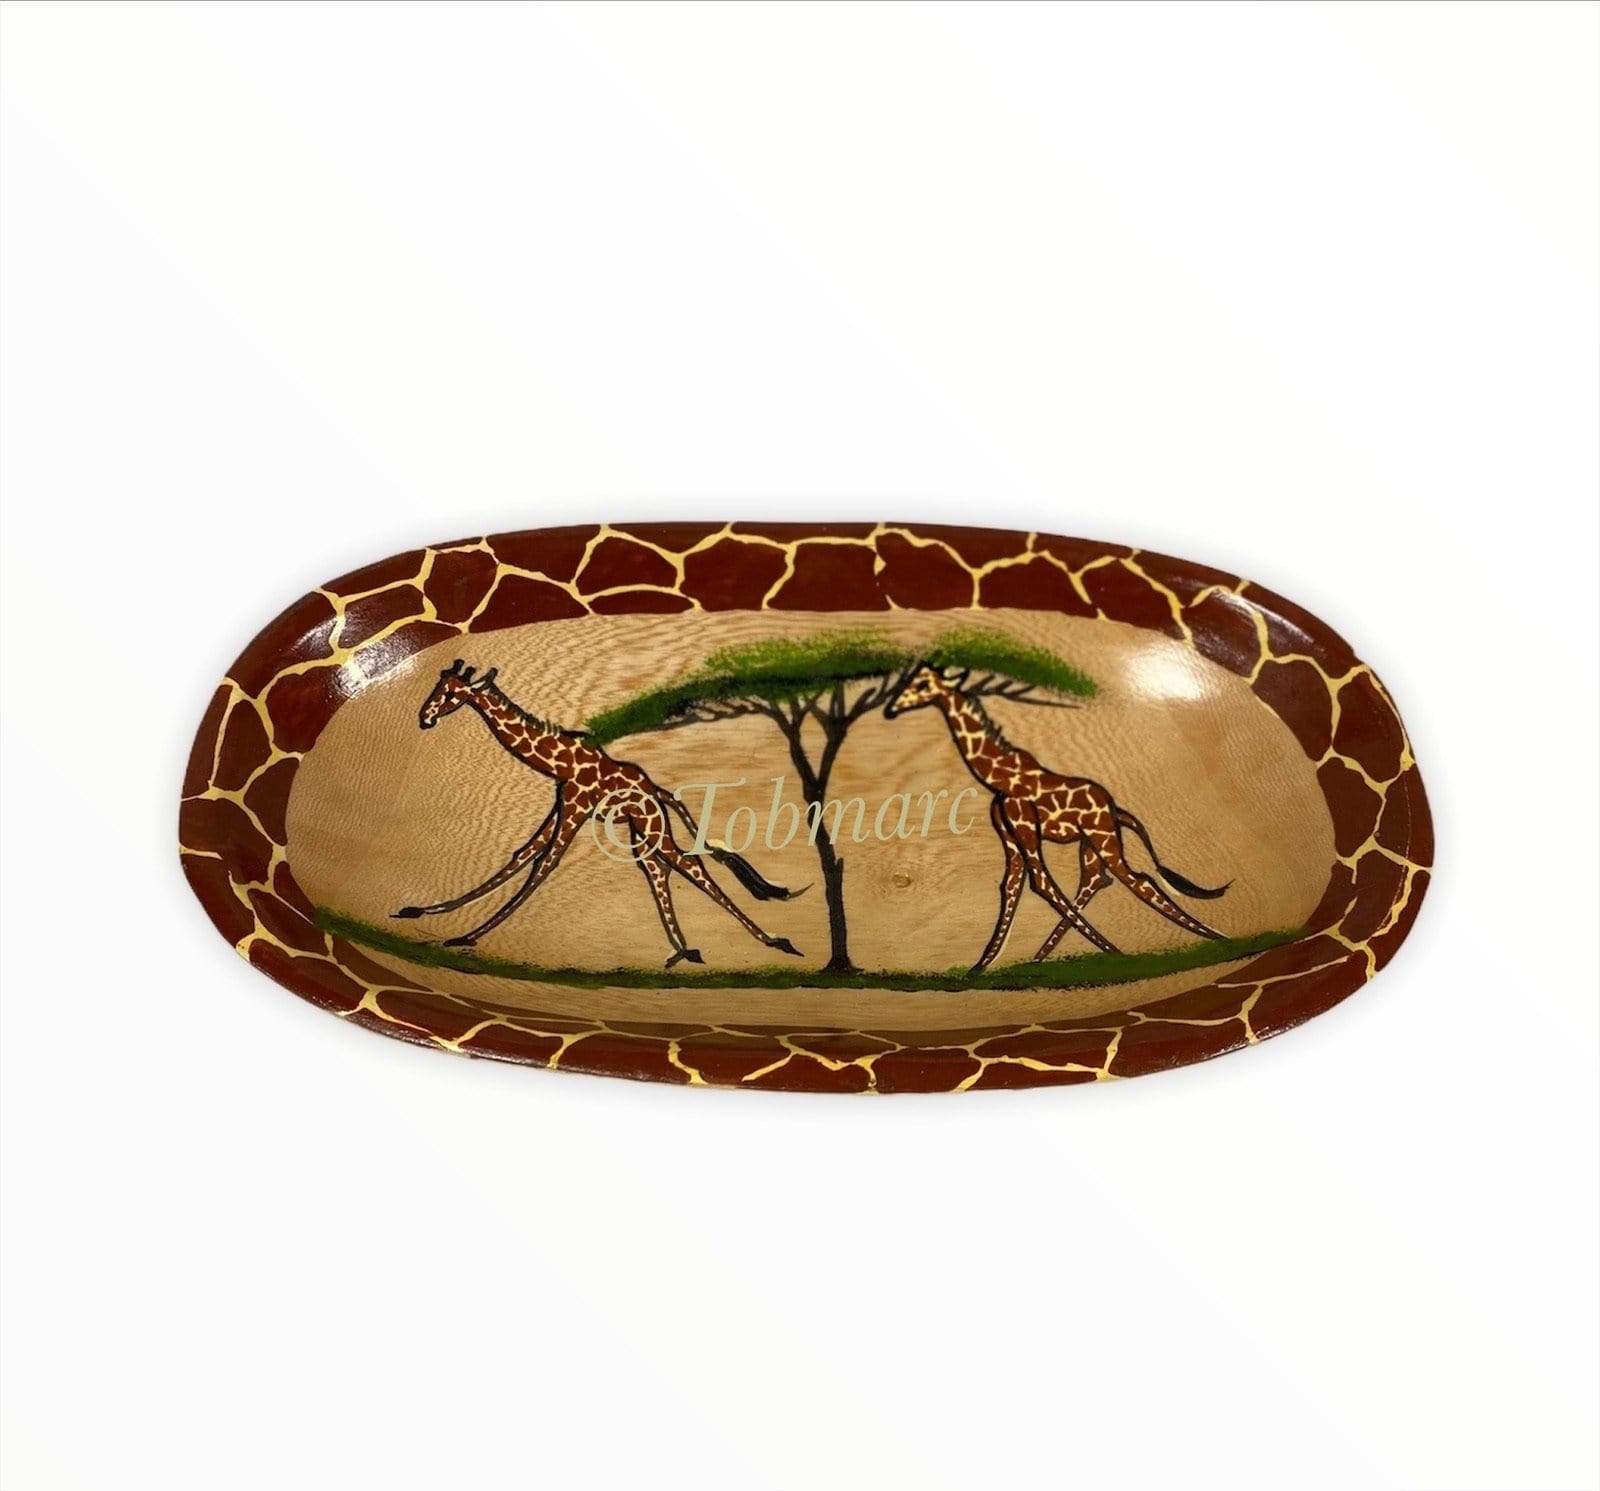 Tobmarc Home Decor & Gifts  Handcrafted African Soapstone Bowl with Giraffe Decoration in red and black, Africa Art Bowl, African Decorative Bowl 4